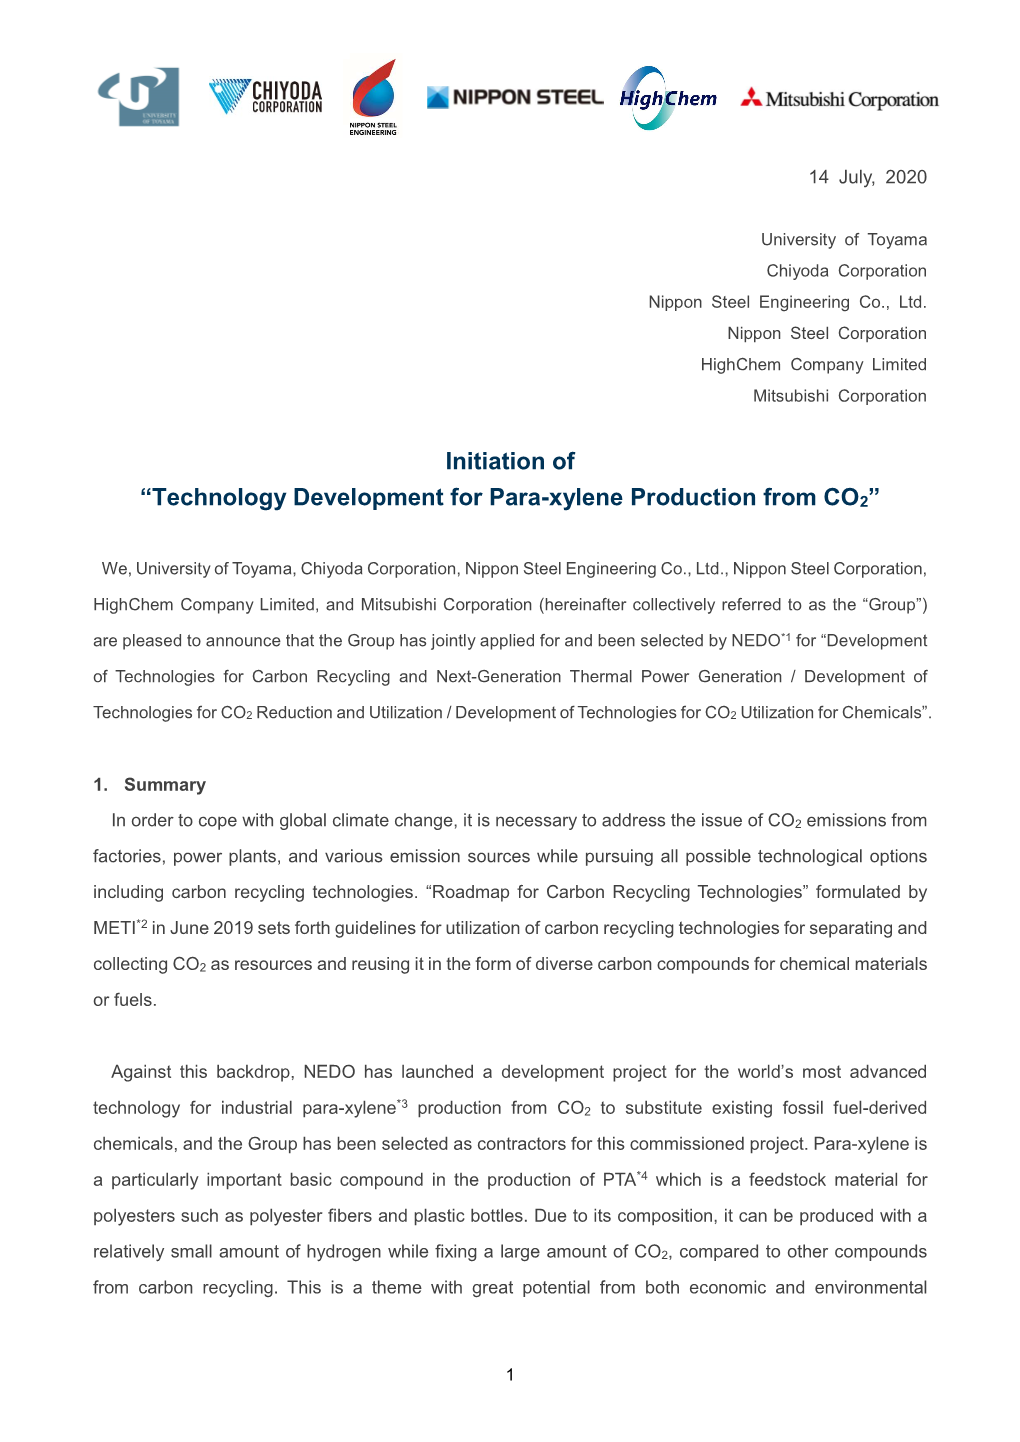 Initiation of “Technology Development for Para-Xylene Production from CO2”